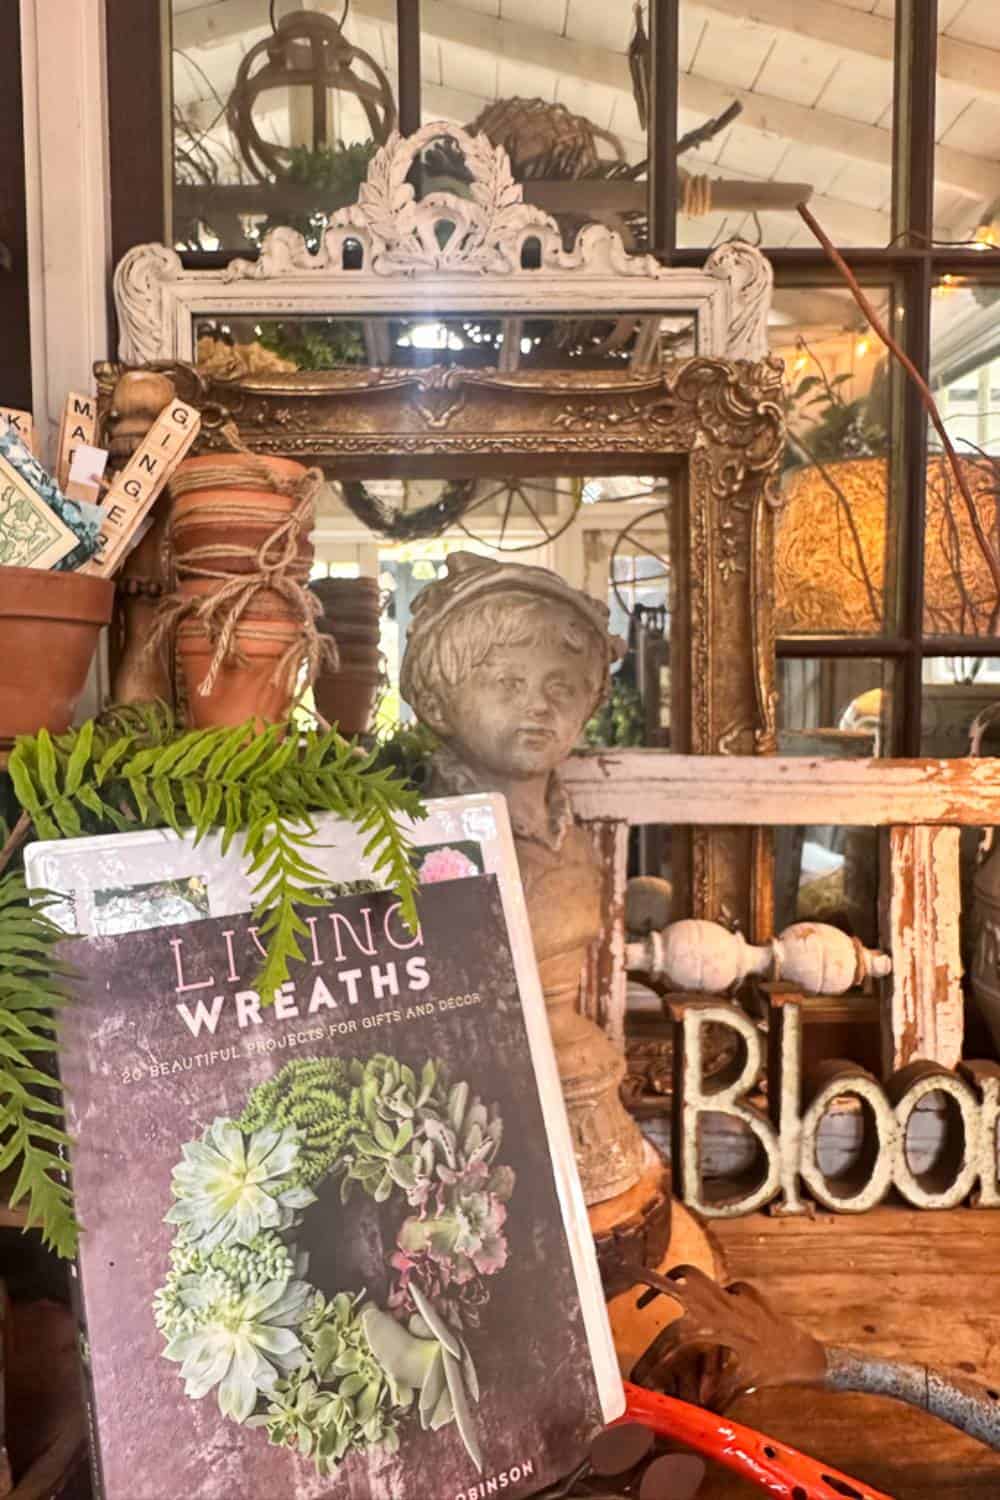 A close-up of the work desk inside the She Shed styled for summer with garden books, antique picture frames, and vintage garden decor